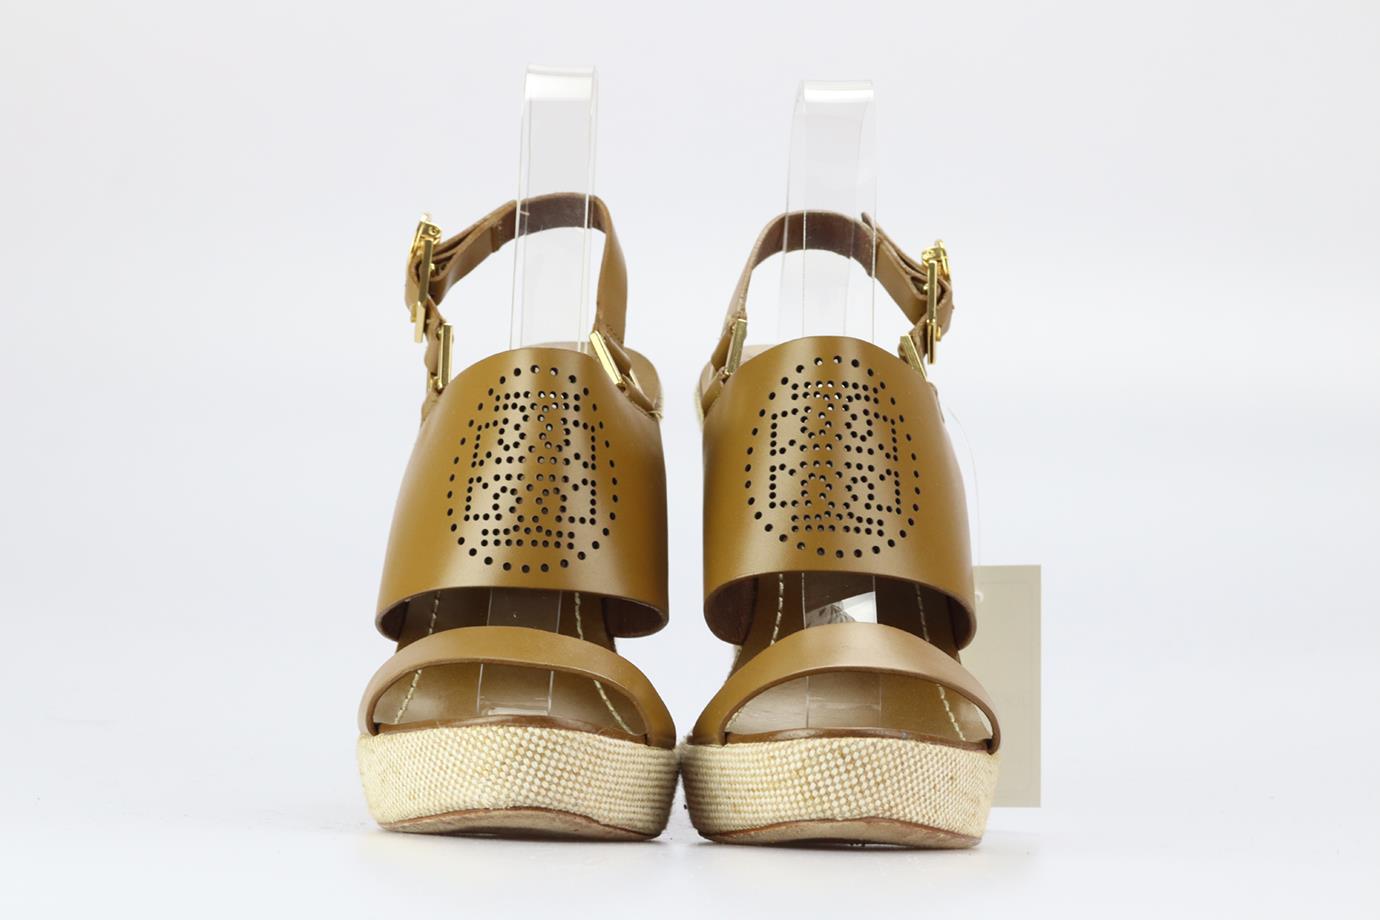 TORY BURCH LEATHER AND CANVAS WEDGE SANDALS EU 39.5 UK 6.5 US 9.5